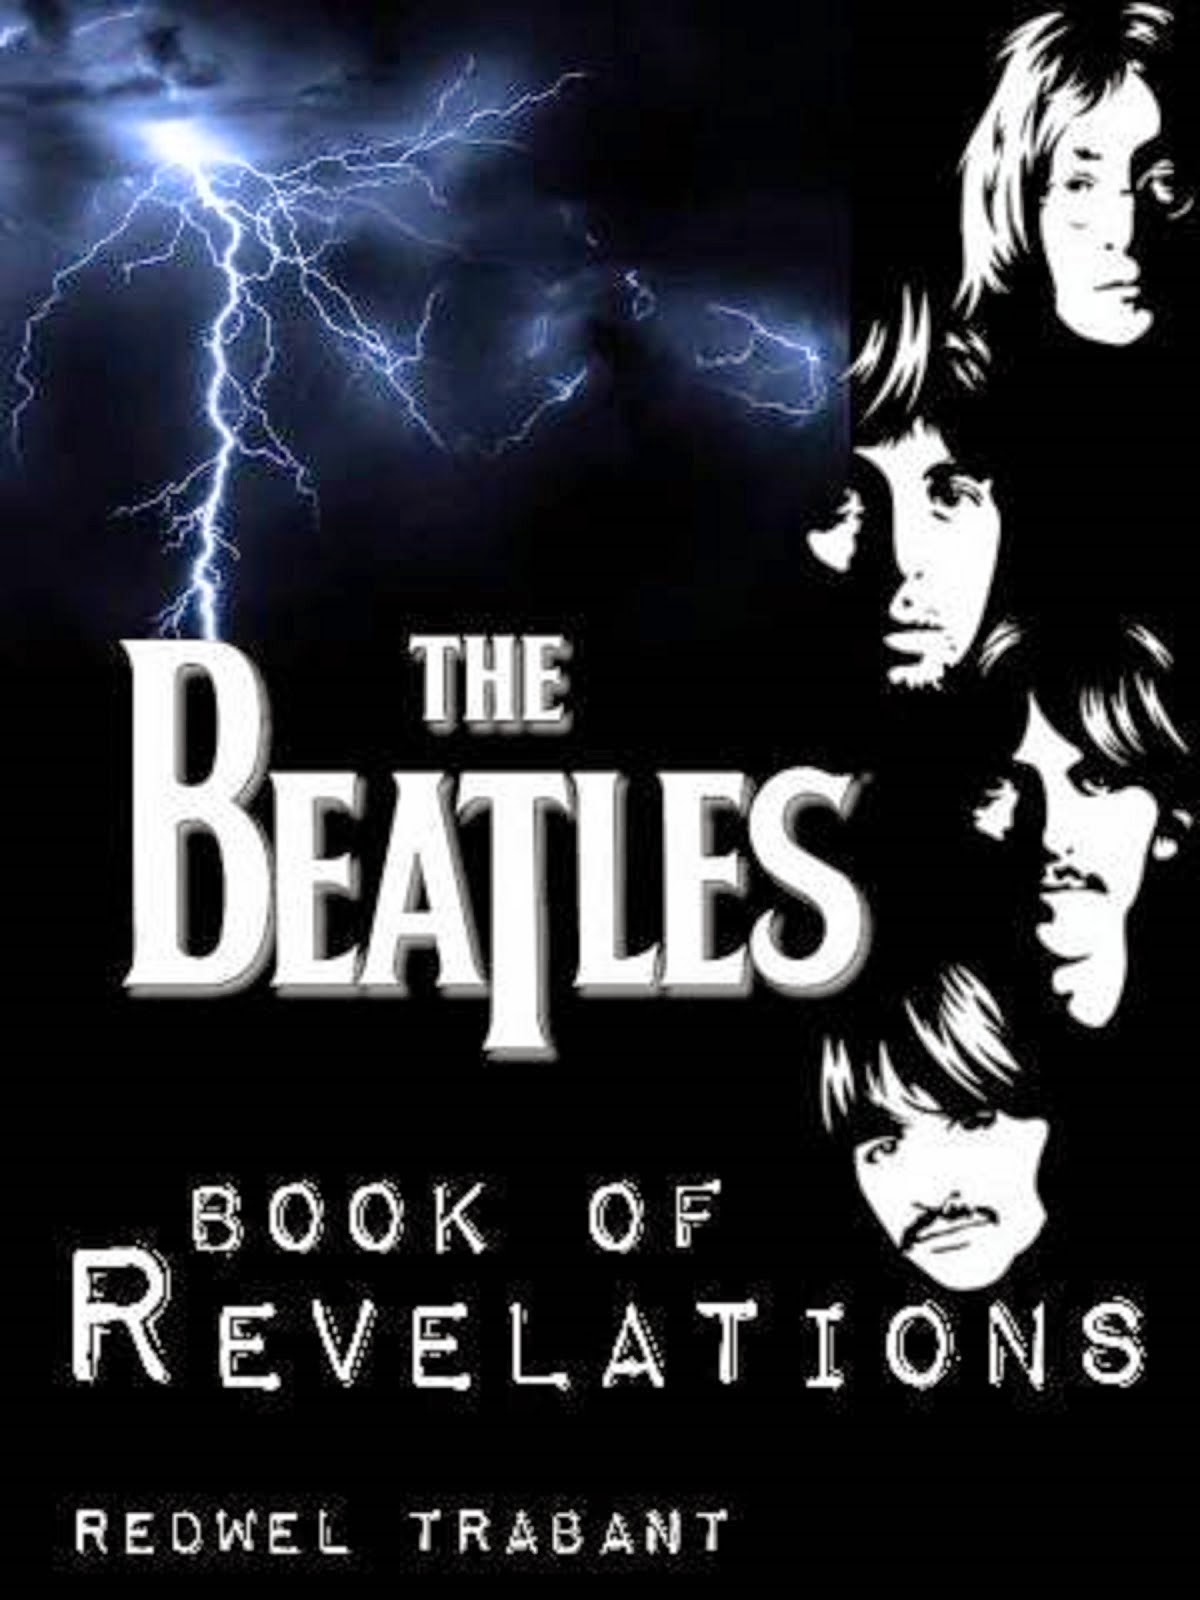 THE BEATLES BOOK OF REVELATIONS